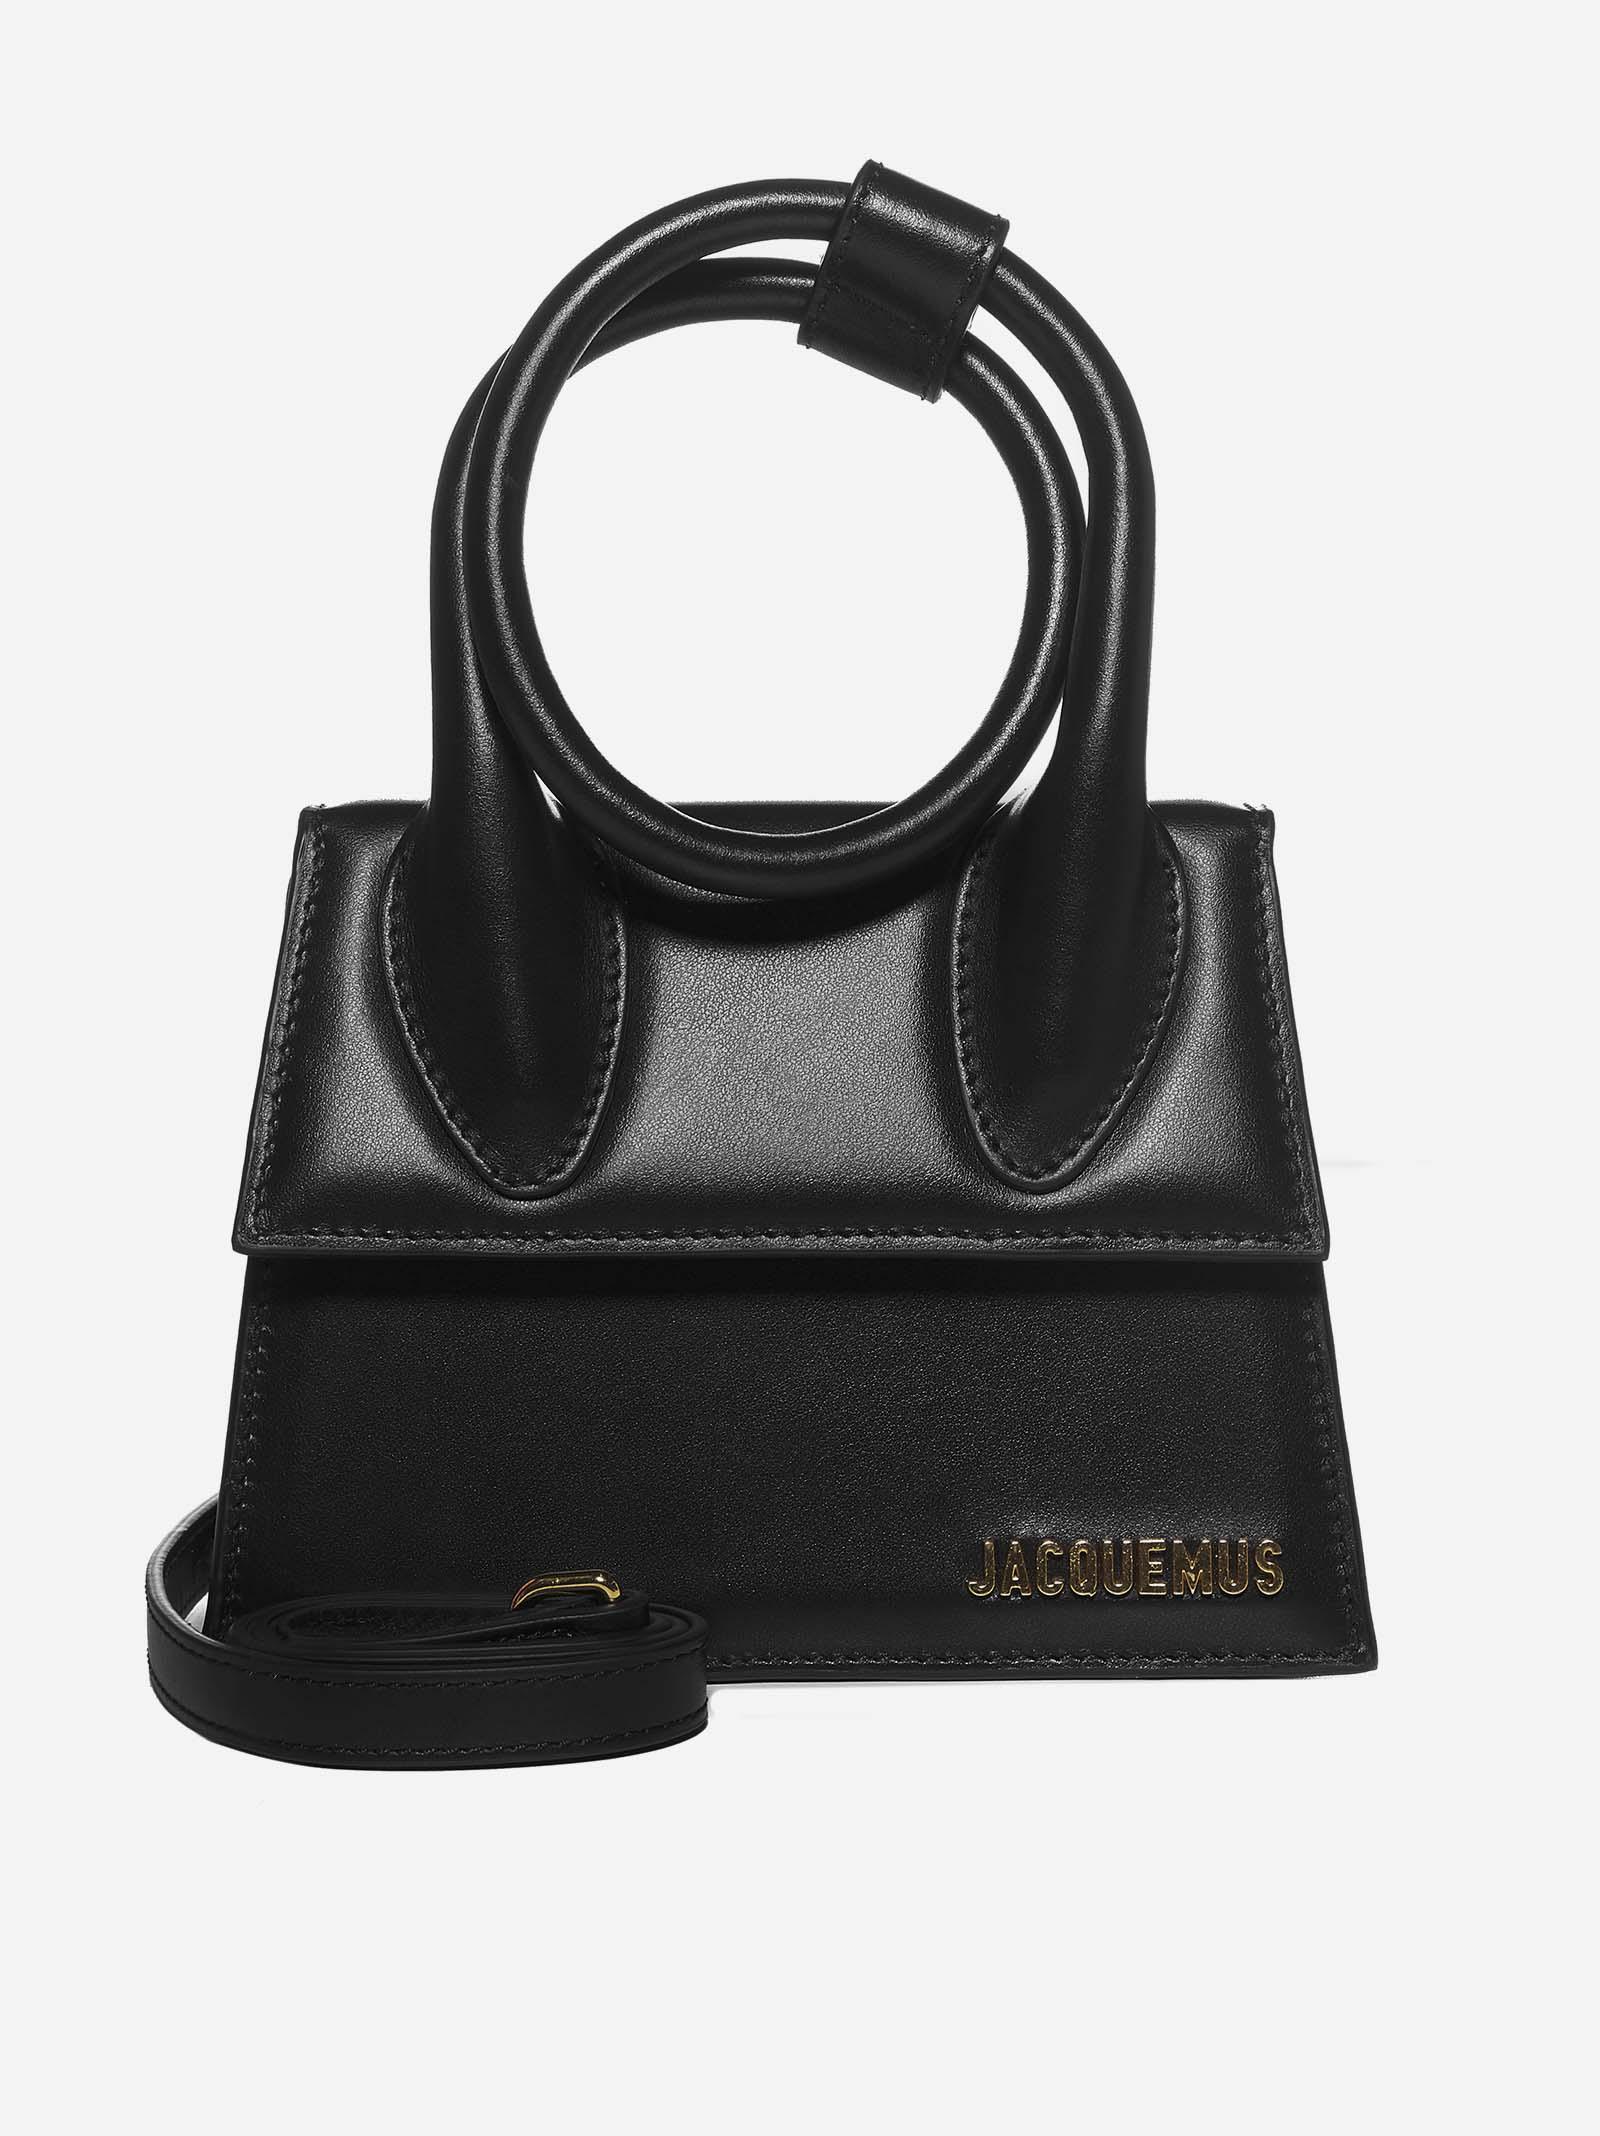 Jacquemus Le Chiquito Noeud in Black | Lyst